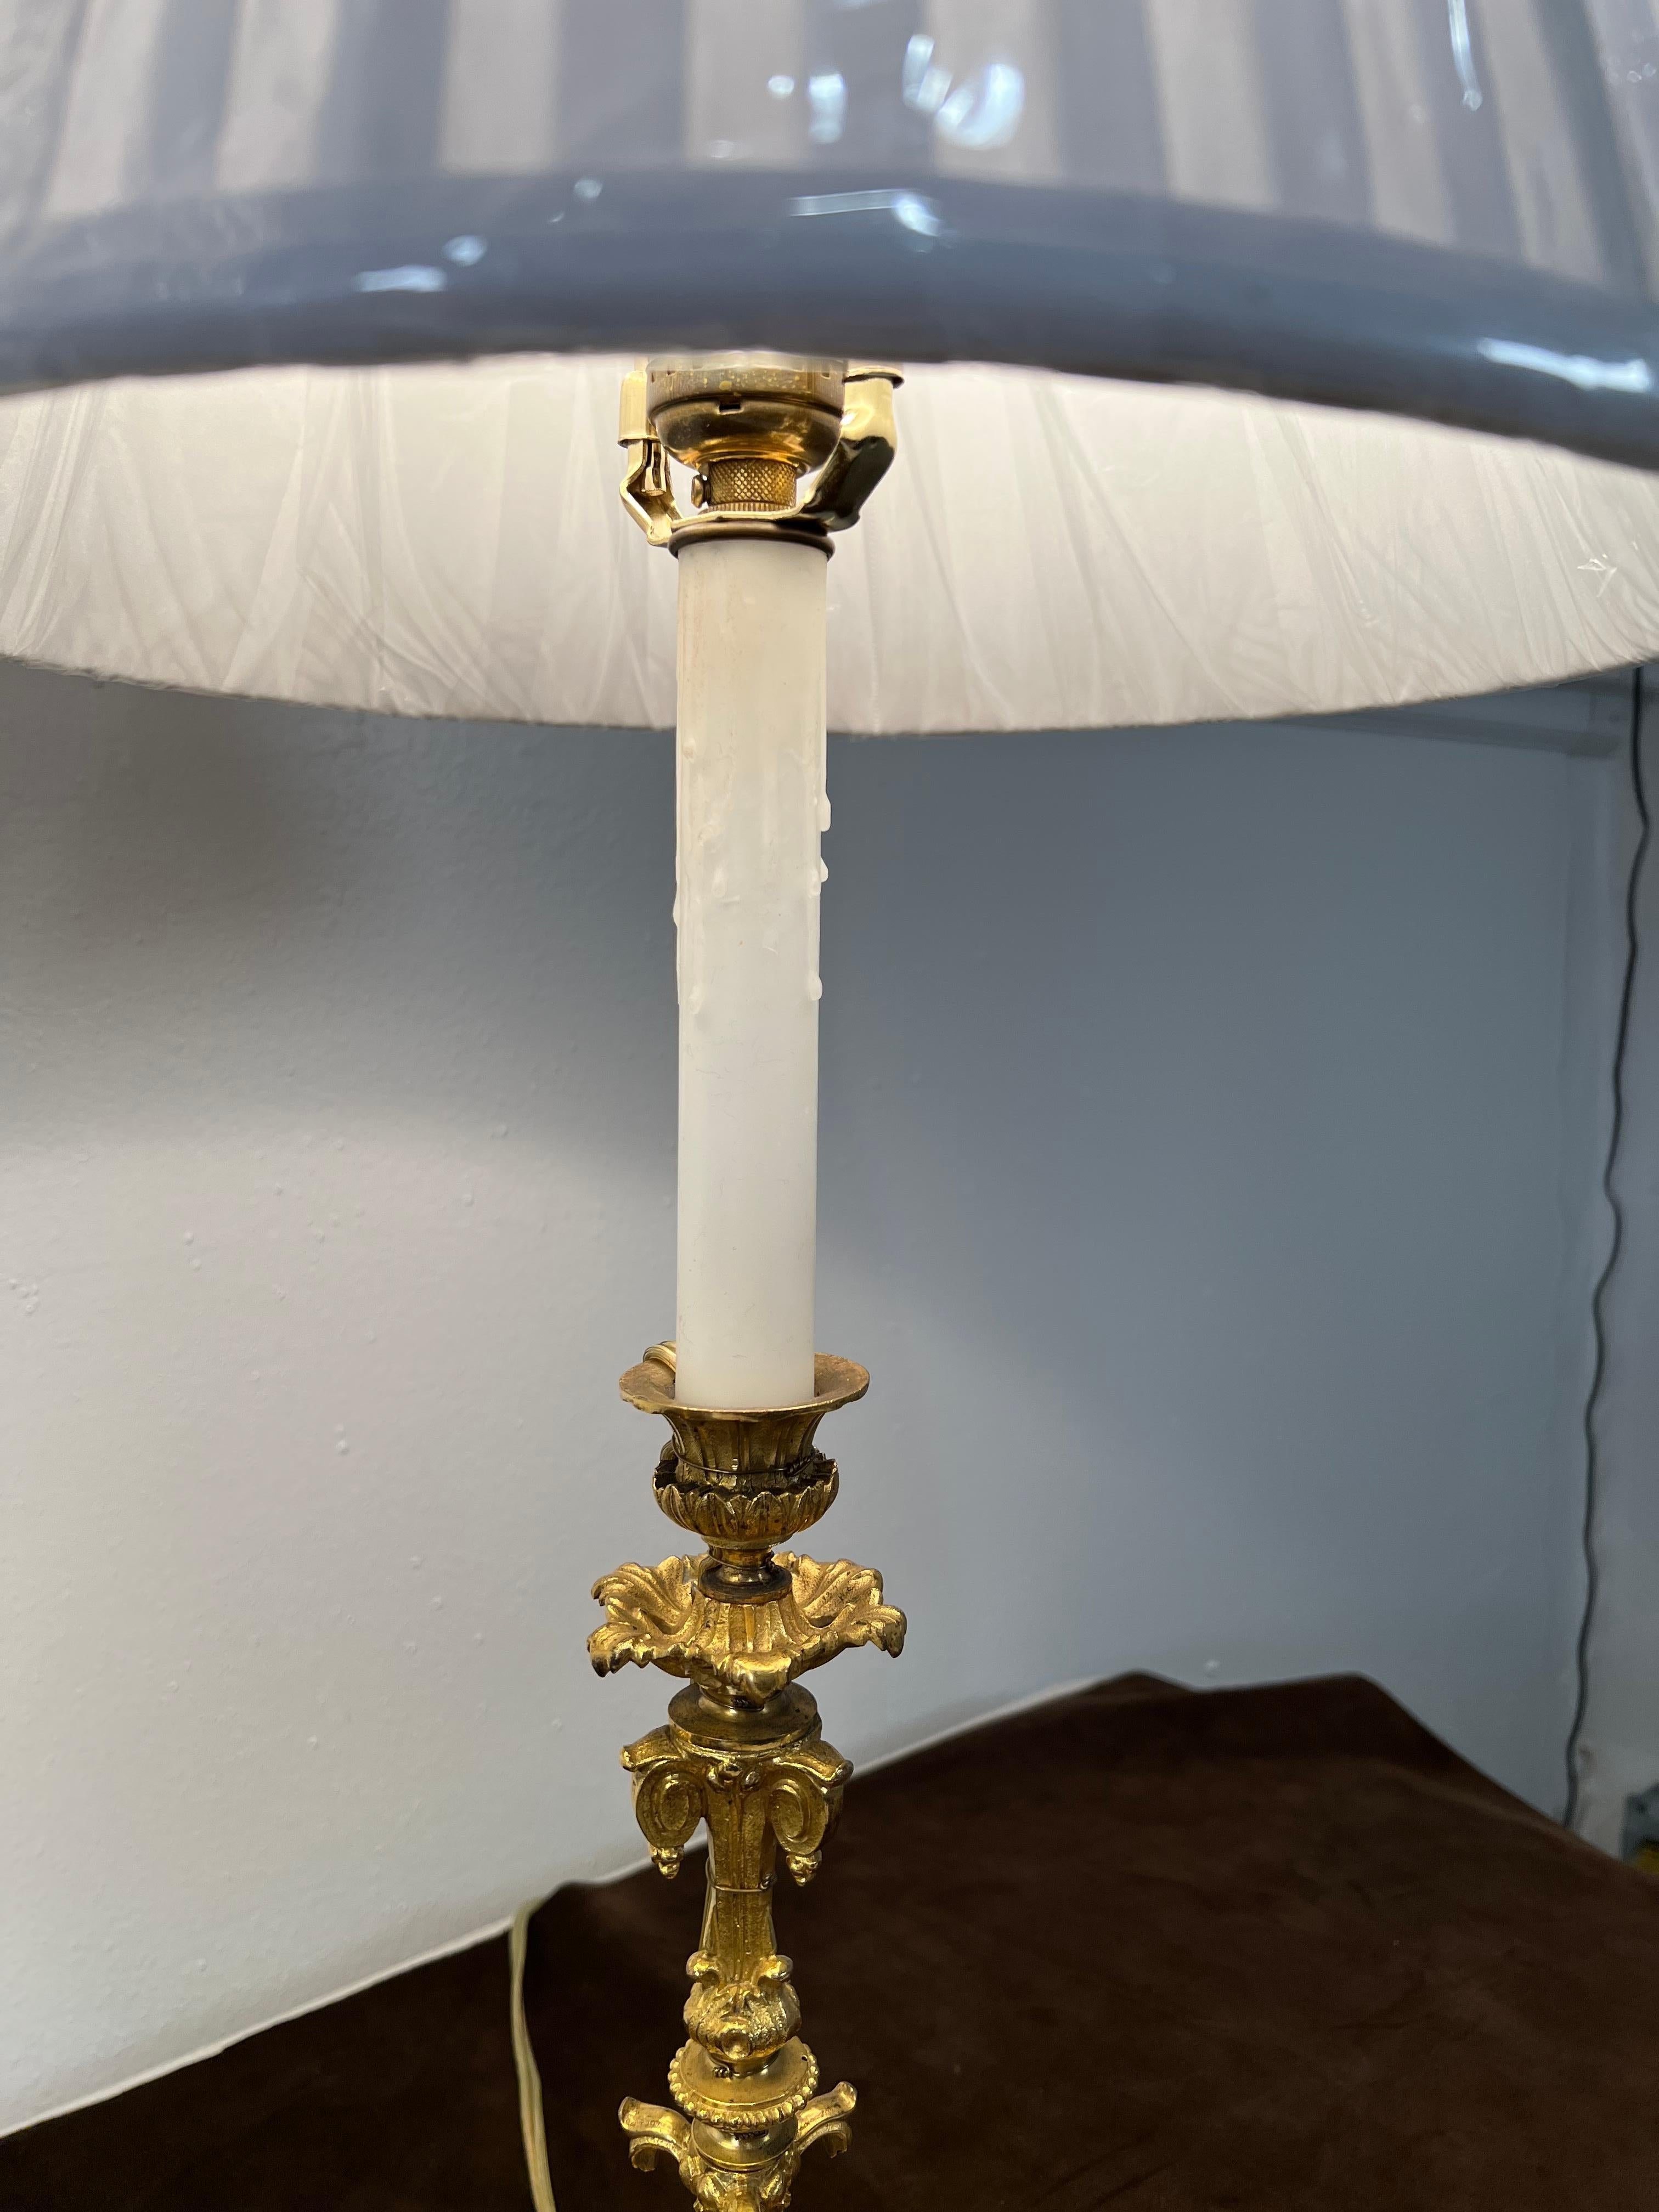 A pair of Ormolu candlestick form lamps, 19th century.
Wired & ready for use.
With 12 inch white silk pleated shades.
 